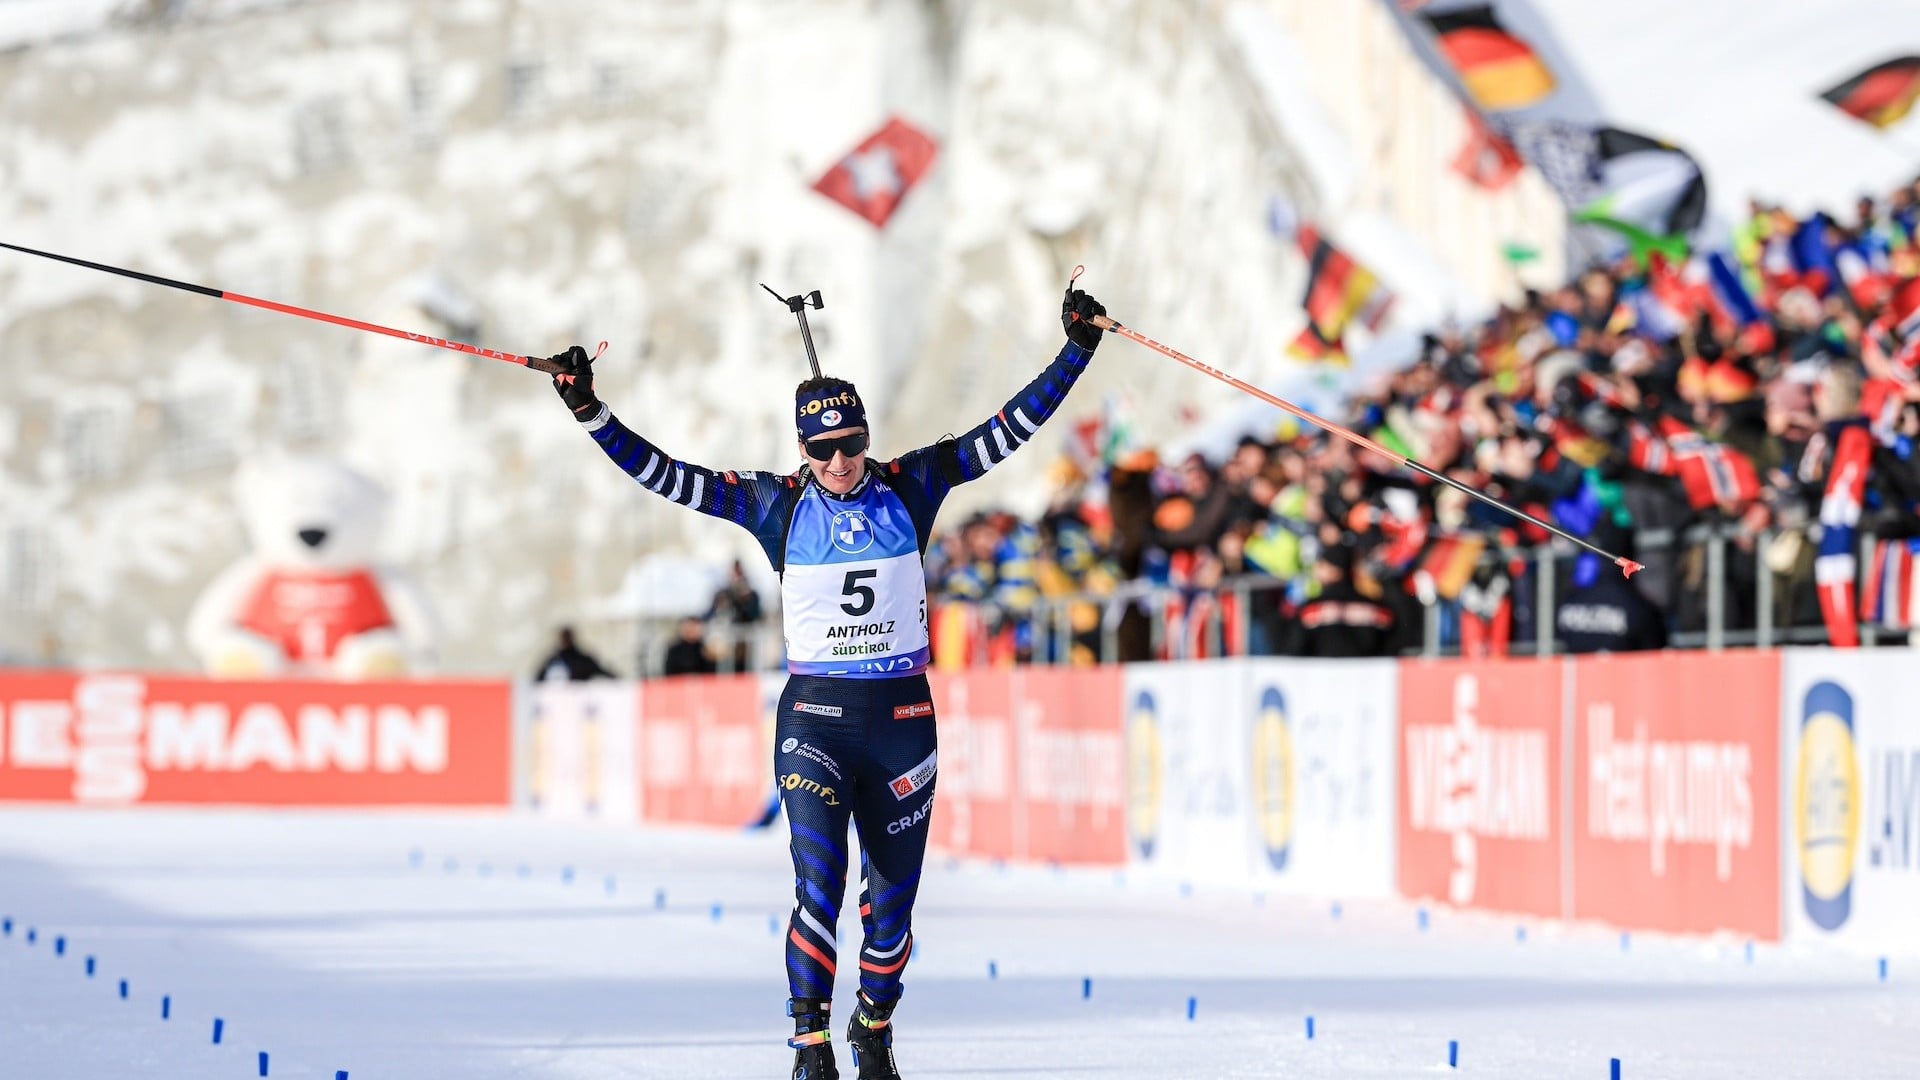 21.01.2024 - Julia Simon jubilant after the final race in Antholz